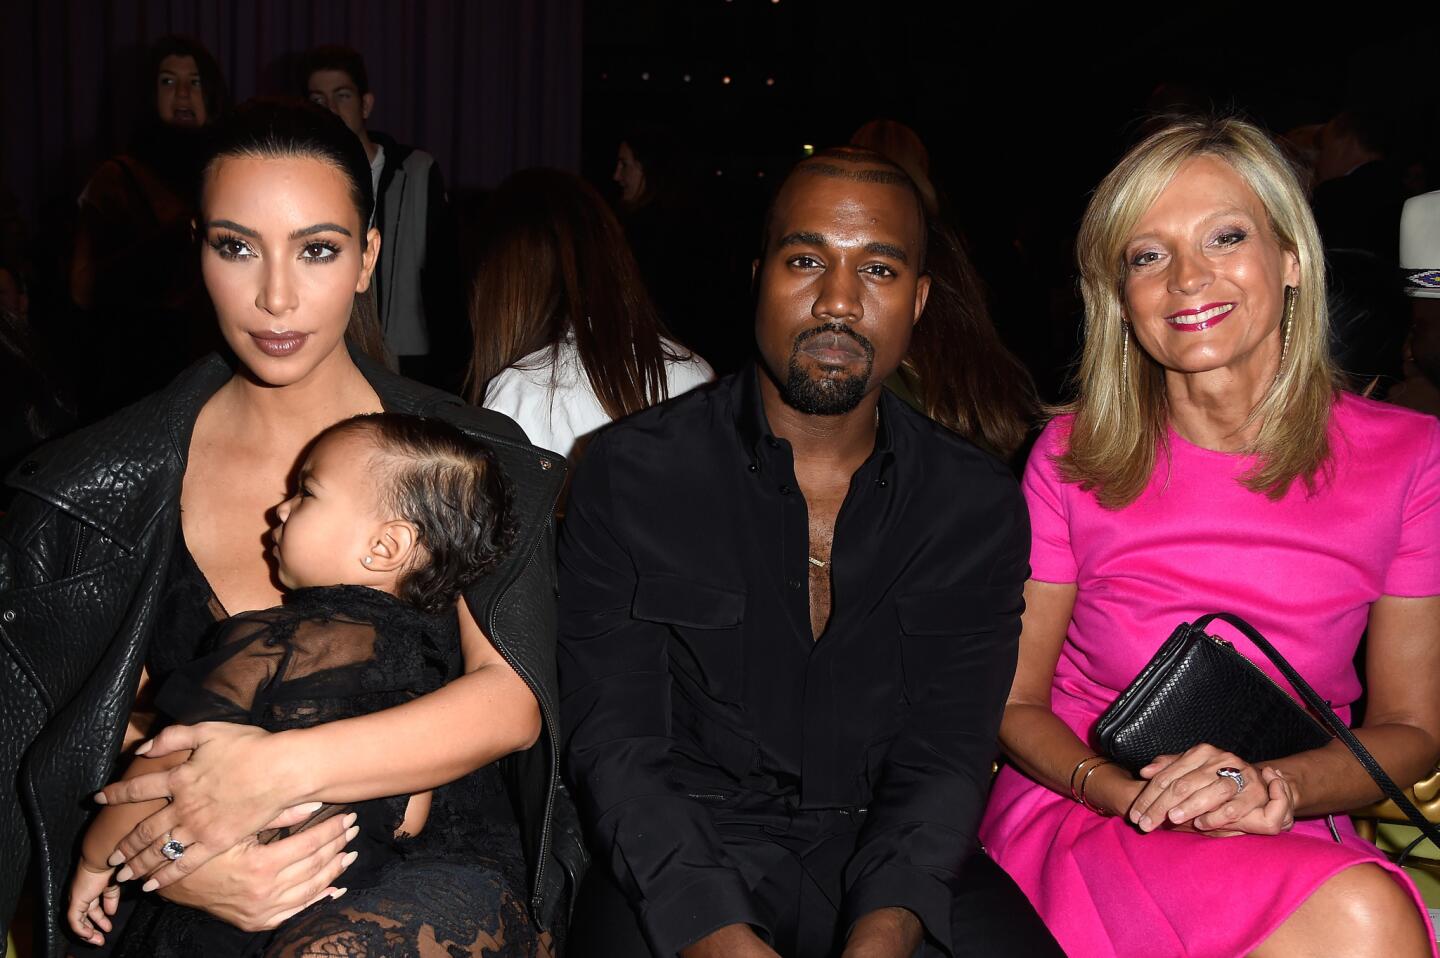 Kim Kardashian and baby North West are in matching sheer black at Paris Fashion Week. Dad Kanye West and Helene Arnault join them at the Givenchy womenswear spring/summer 2015 show.